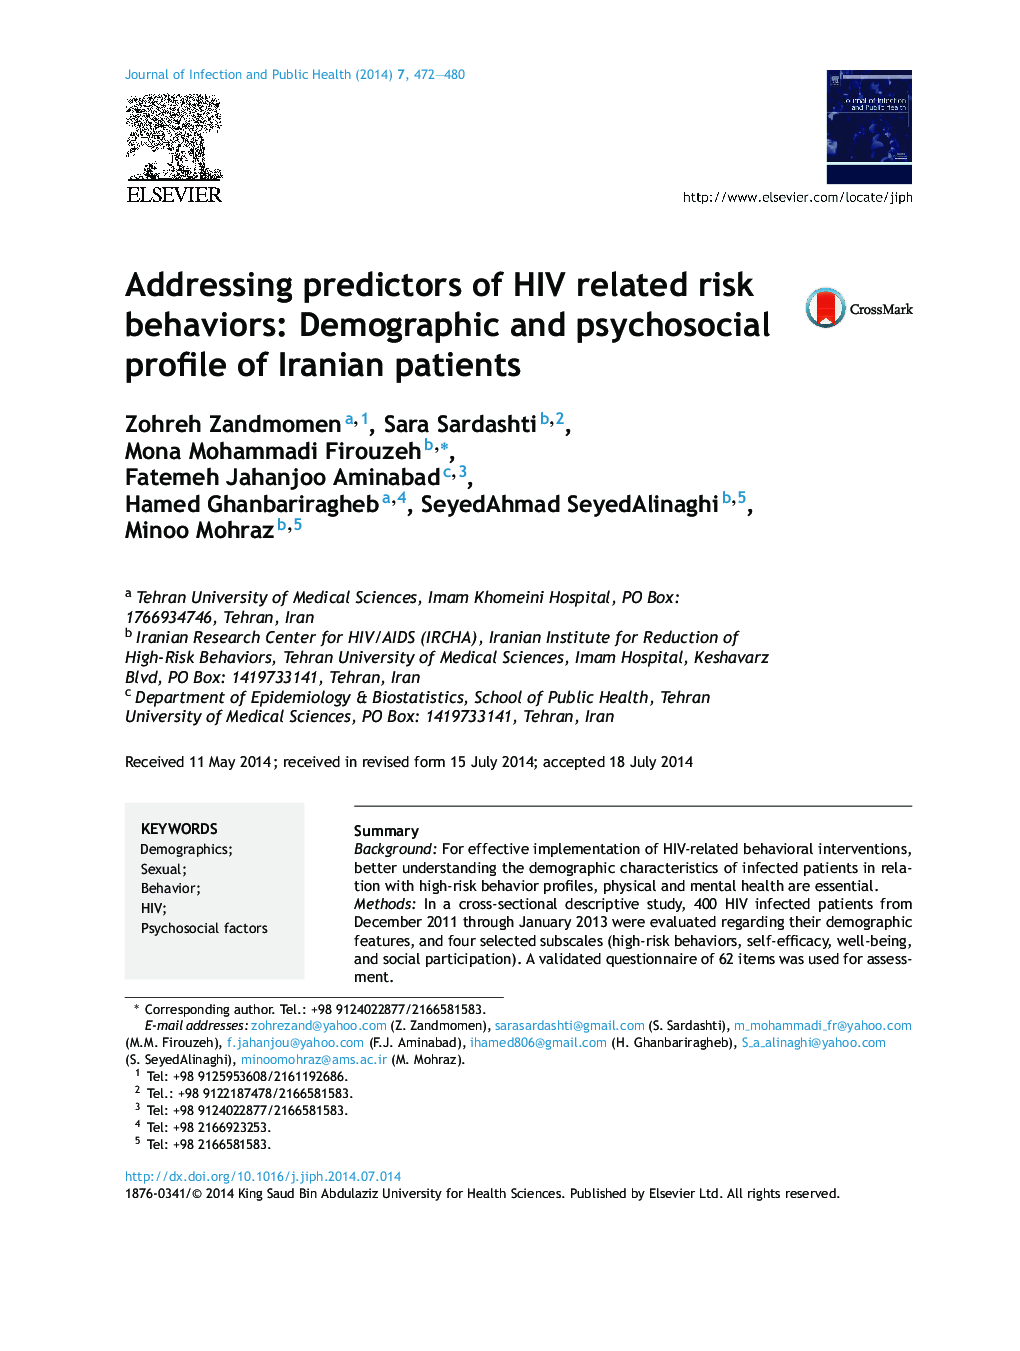 Addressing predictors of HIV related risk behaviors: Demographic and psychosocial profile of Iranian patients